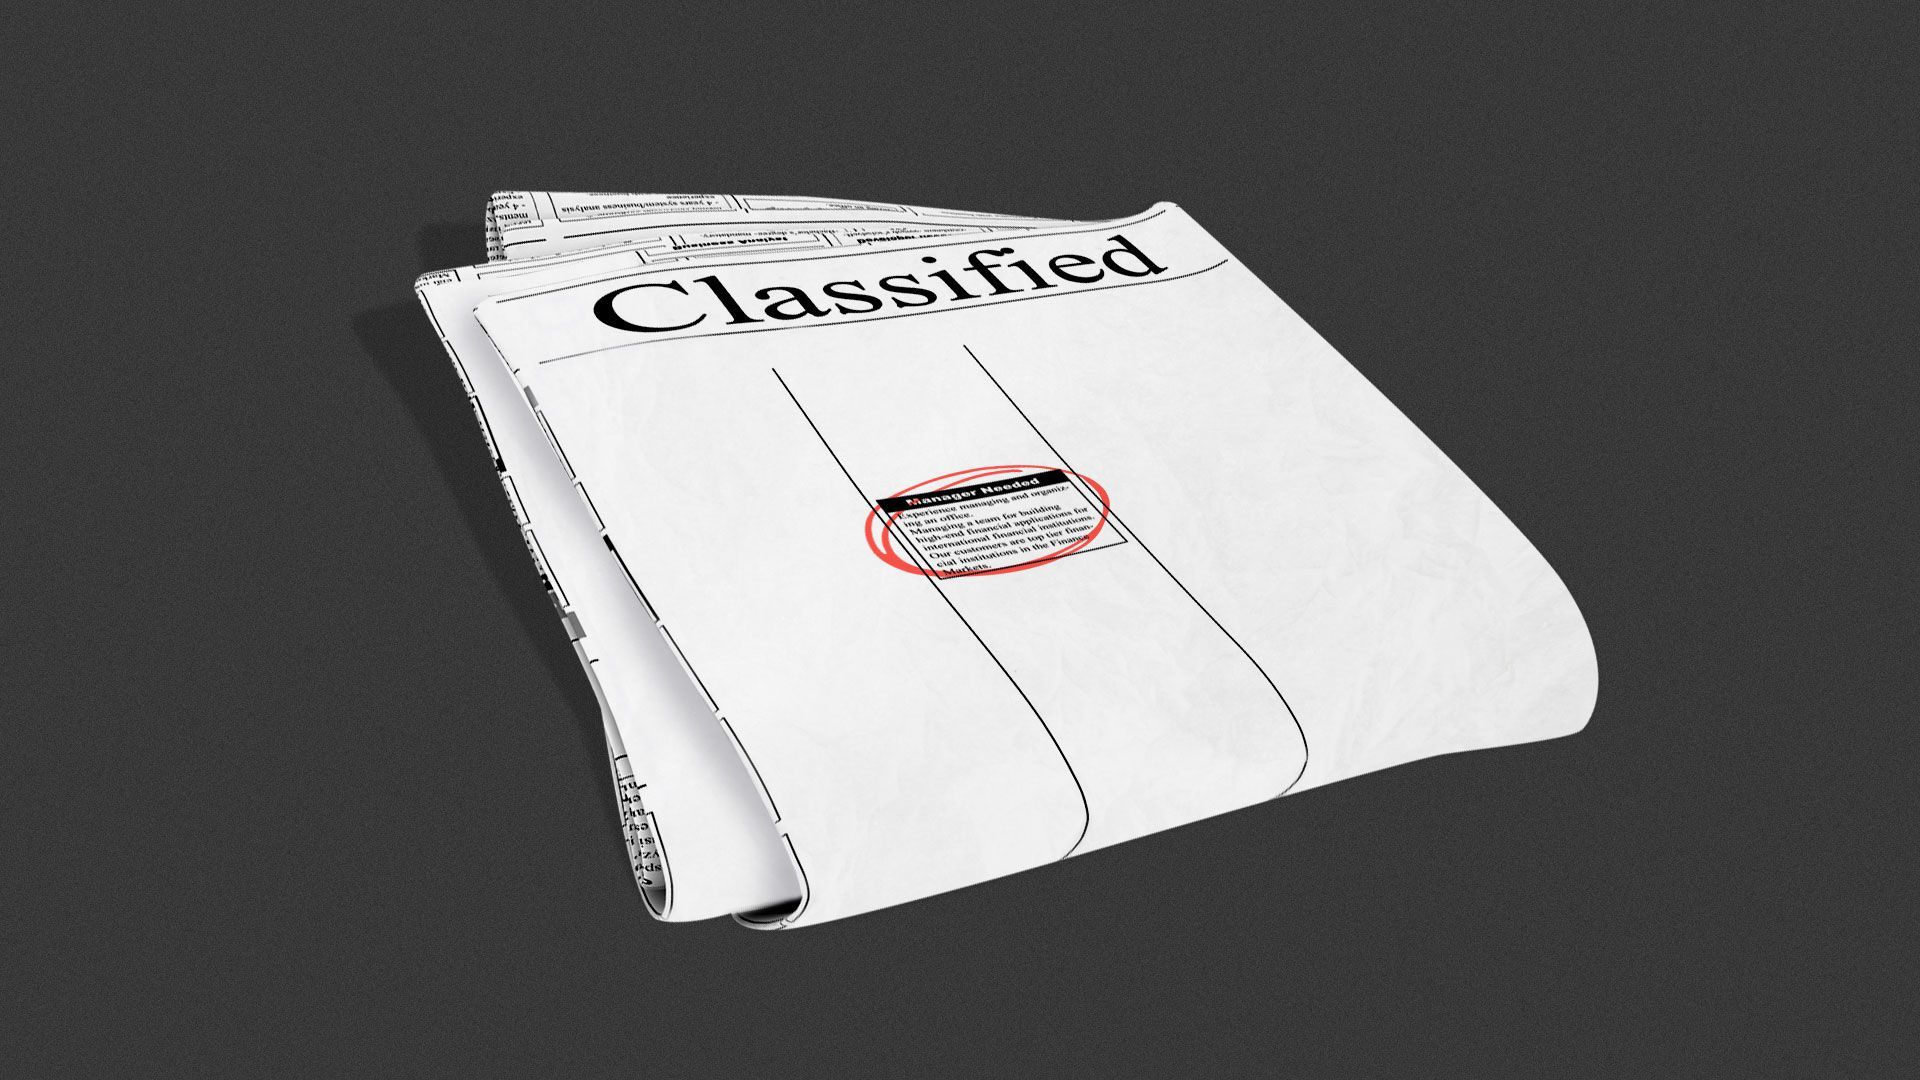 Illustration of classified newspaper with one job posting